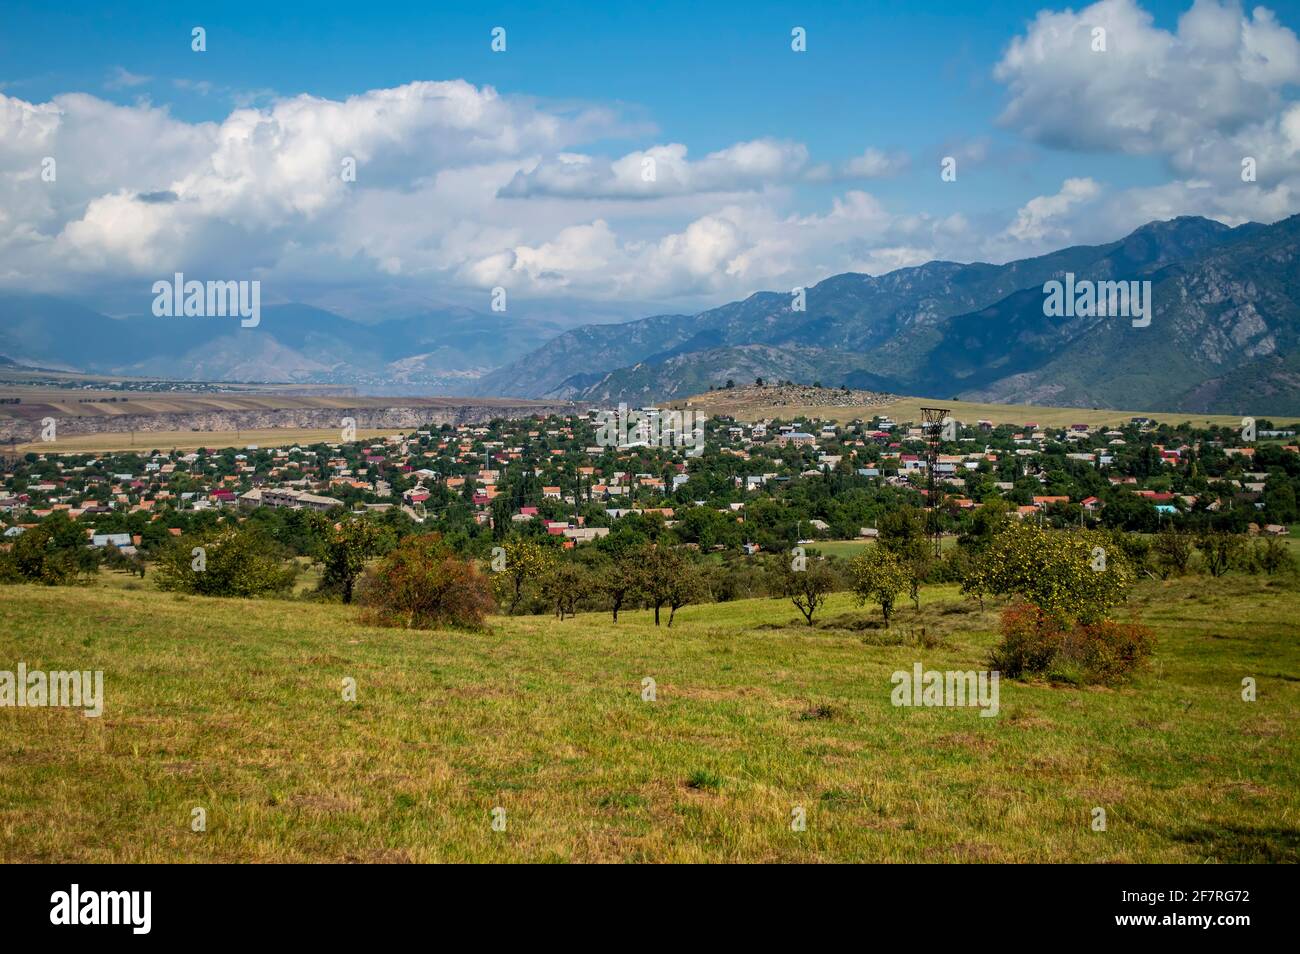 Scenic view of the village of Dsegh overlooking Debed canyon in Armenia Stock Photo